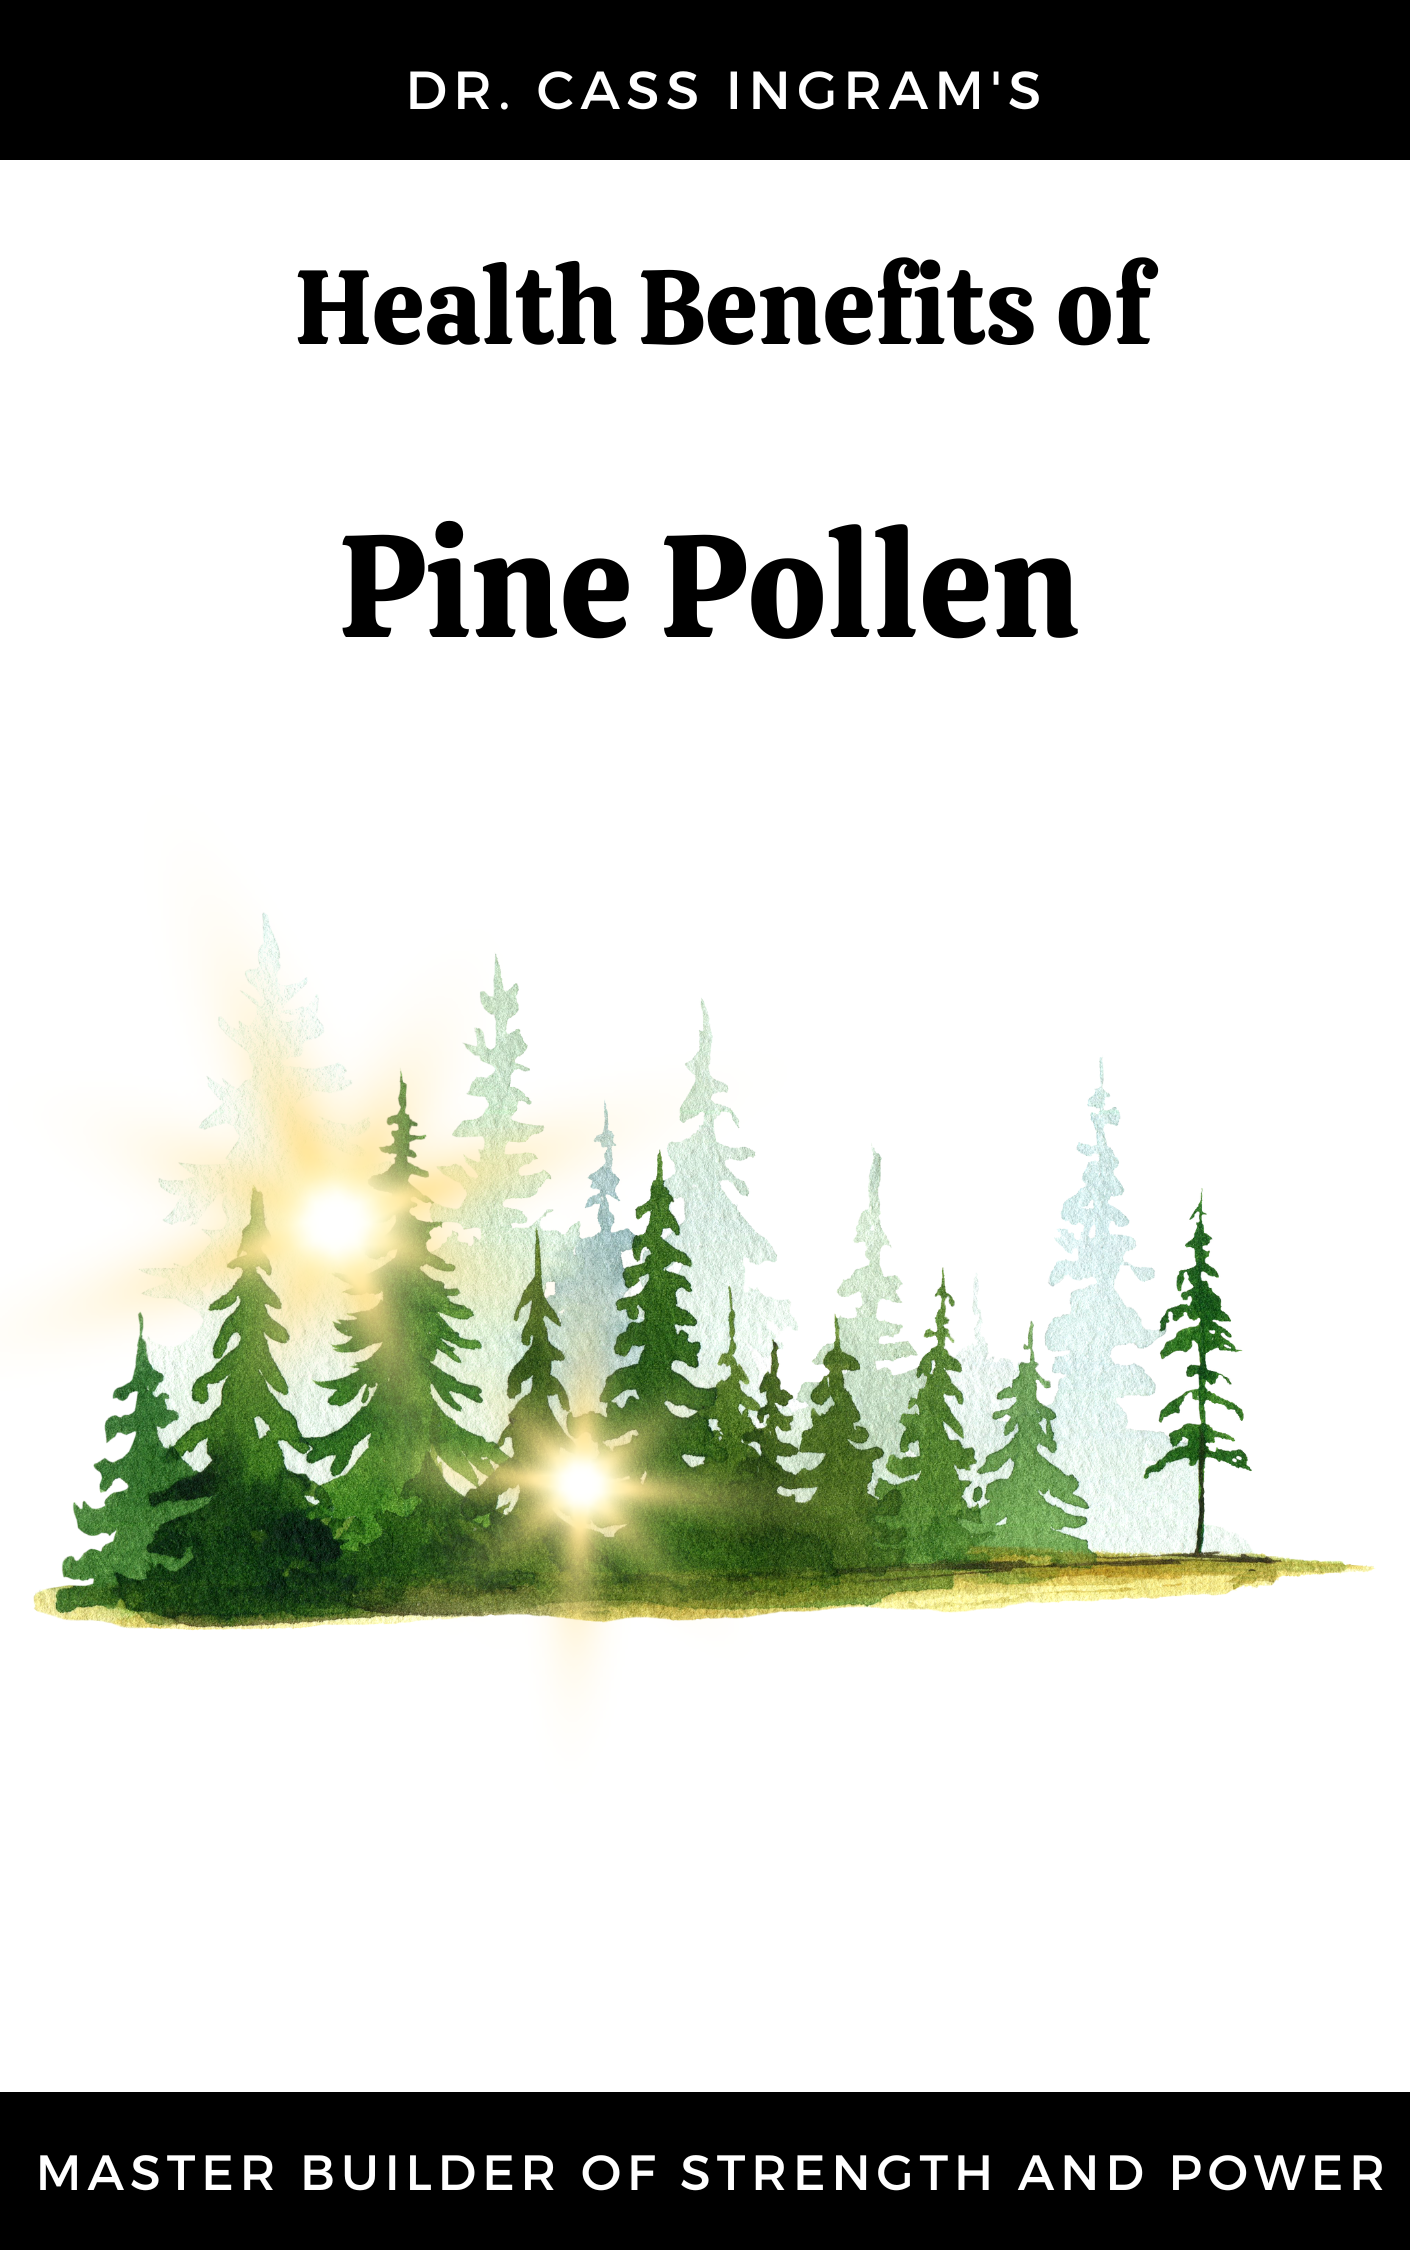 The Health Benefits of Pine Pollen Needles and Sap by Dr Cass Ingram